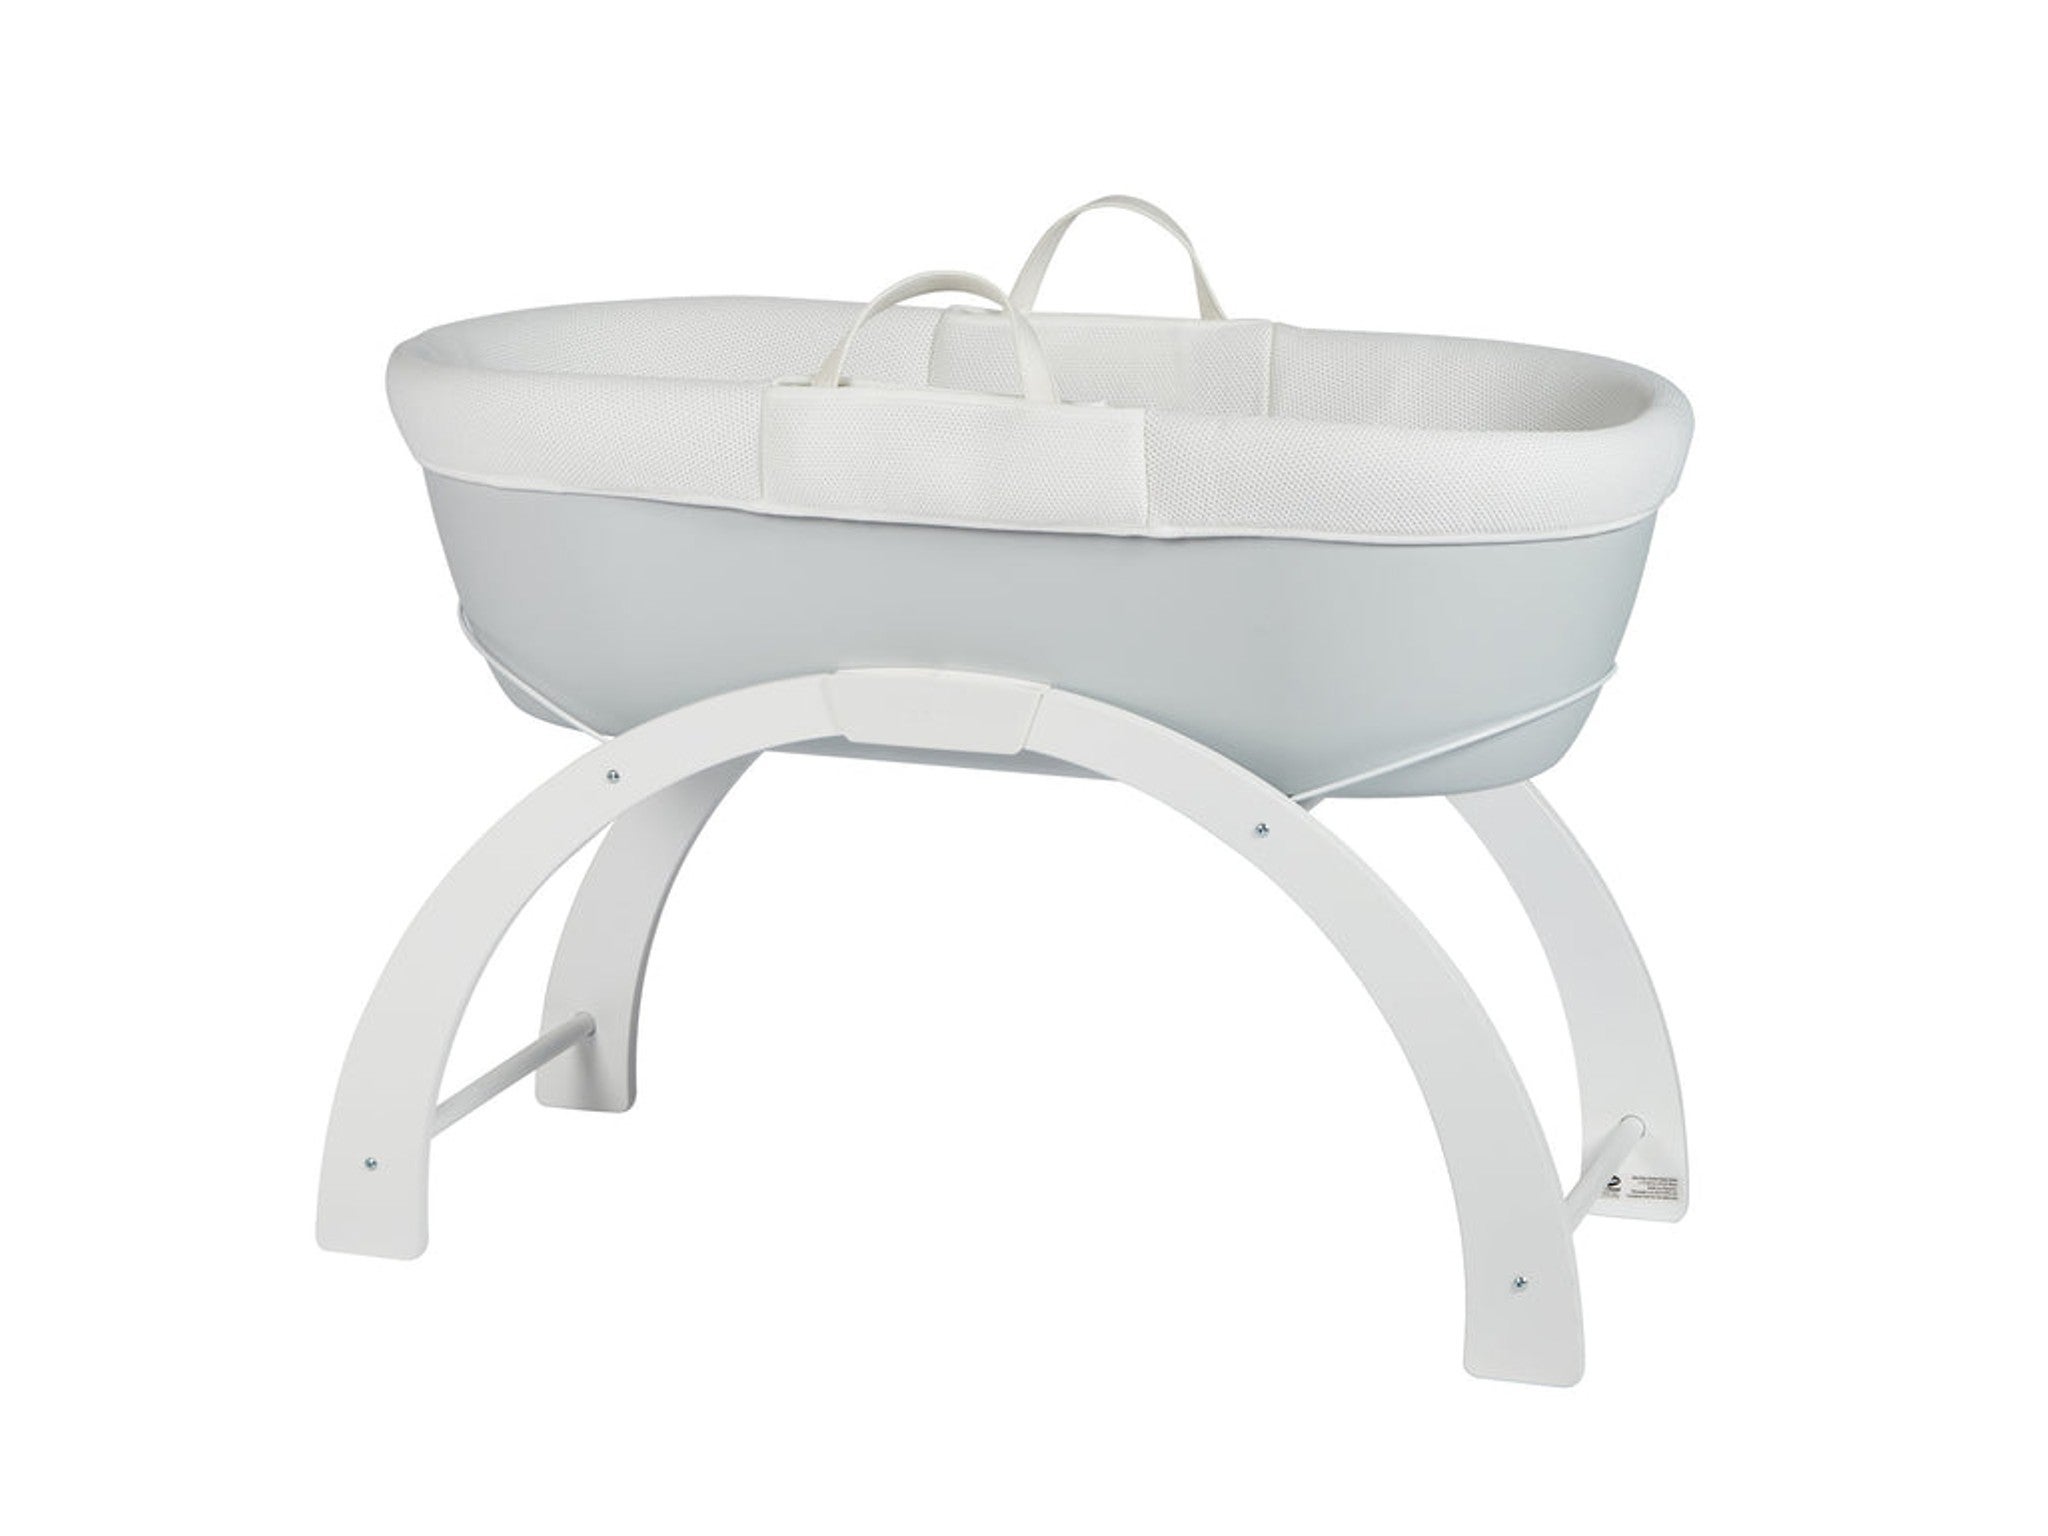 Shnuggle dreami moses basket and stand indybest.jpg